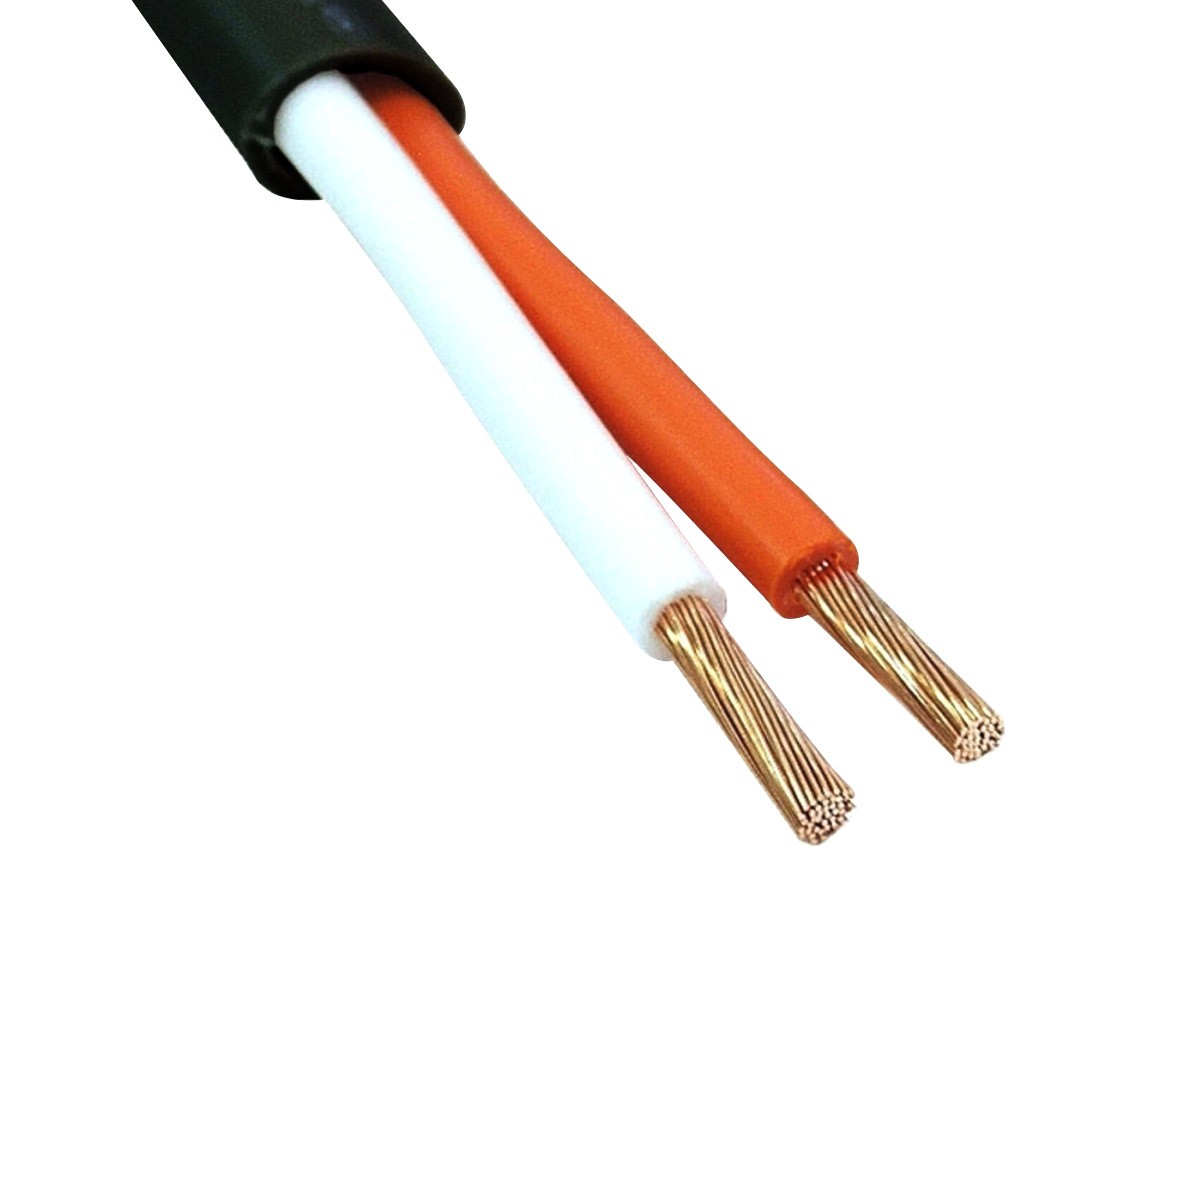 CANARE 2S11F Speaker Cable Copper 2x3.62mm² Ø11mm